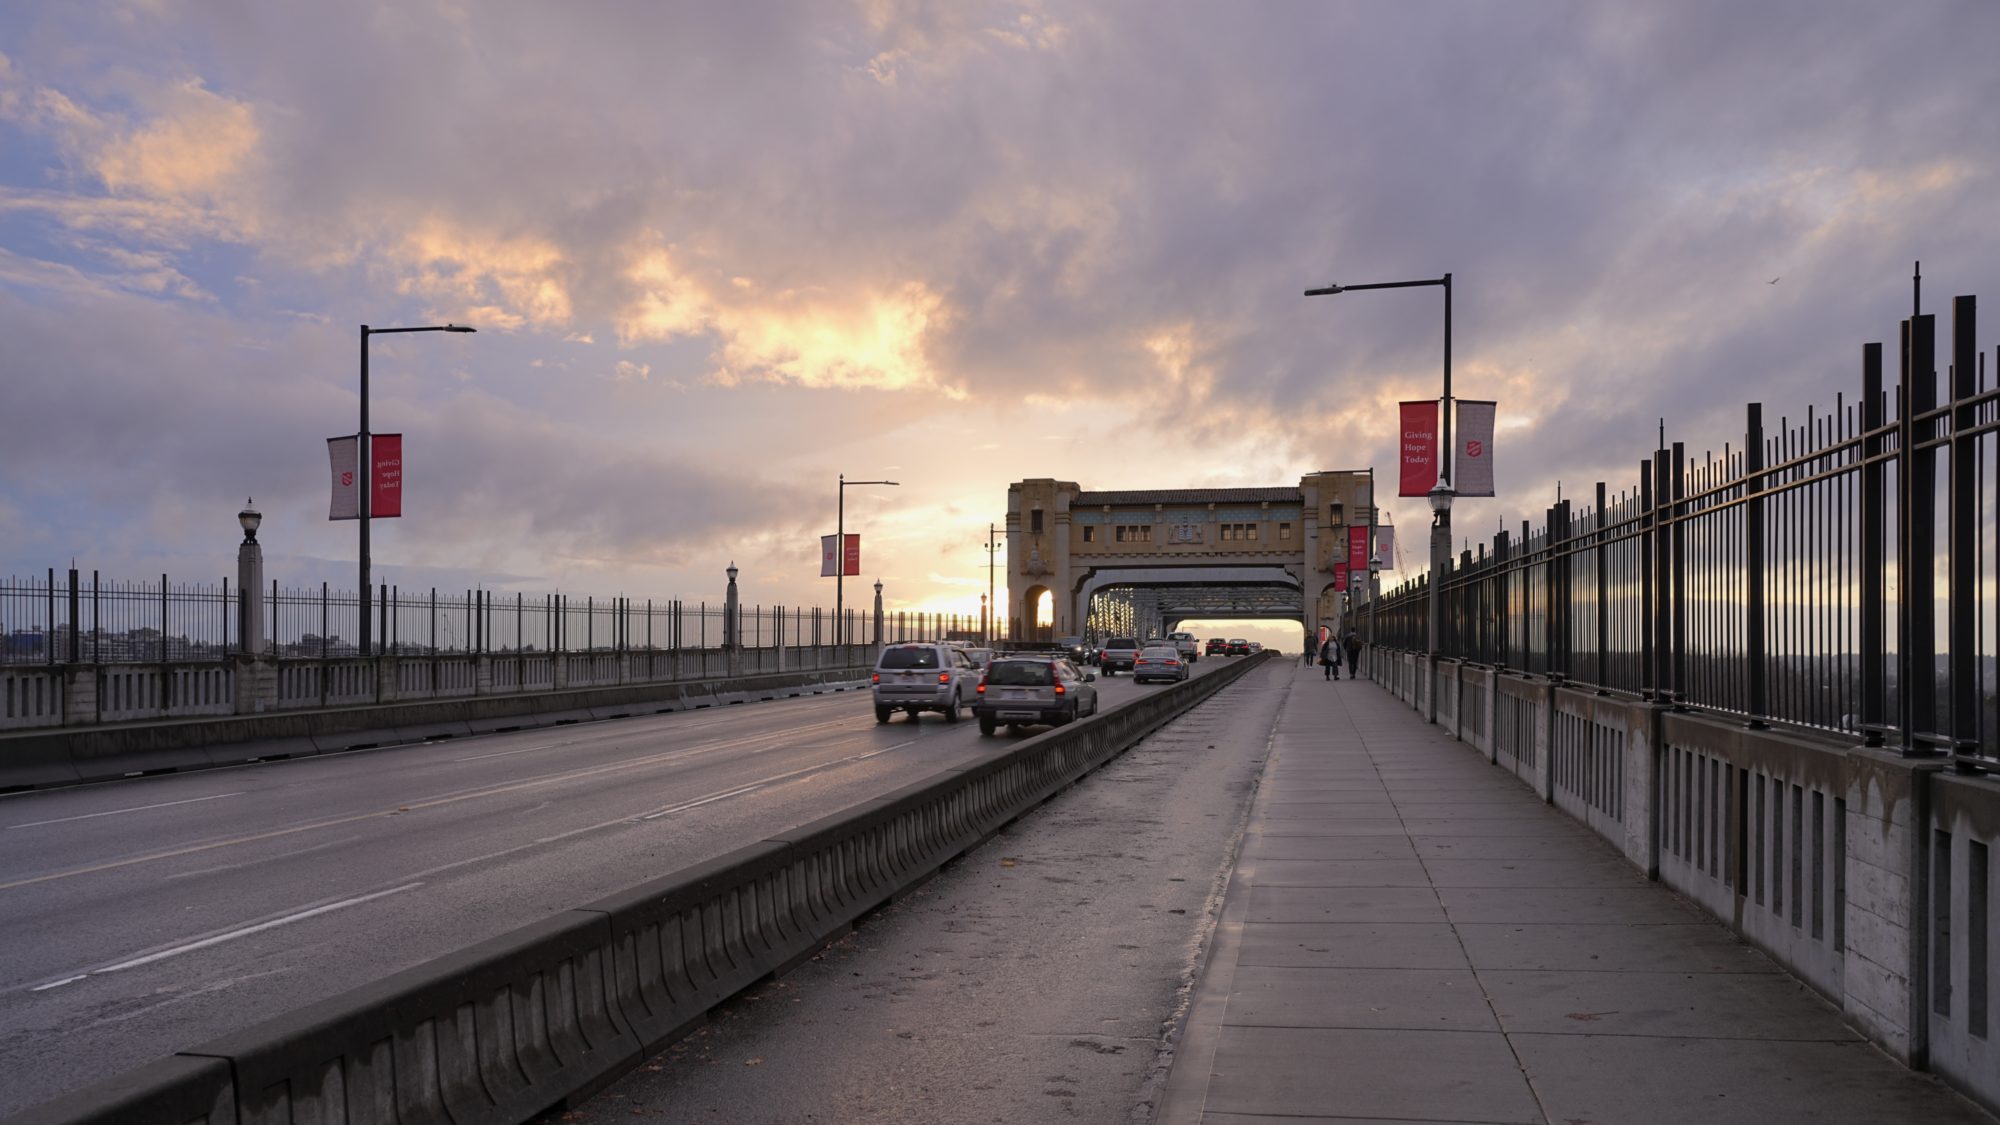 Looking along the length of Burrard Bridge; the sky is purple and gold from the setting sun